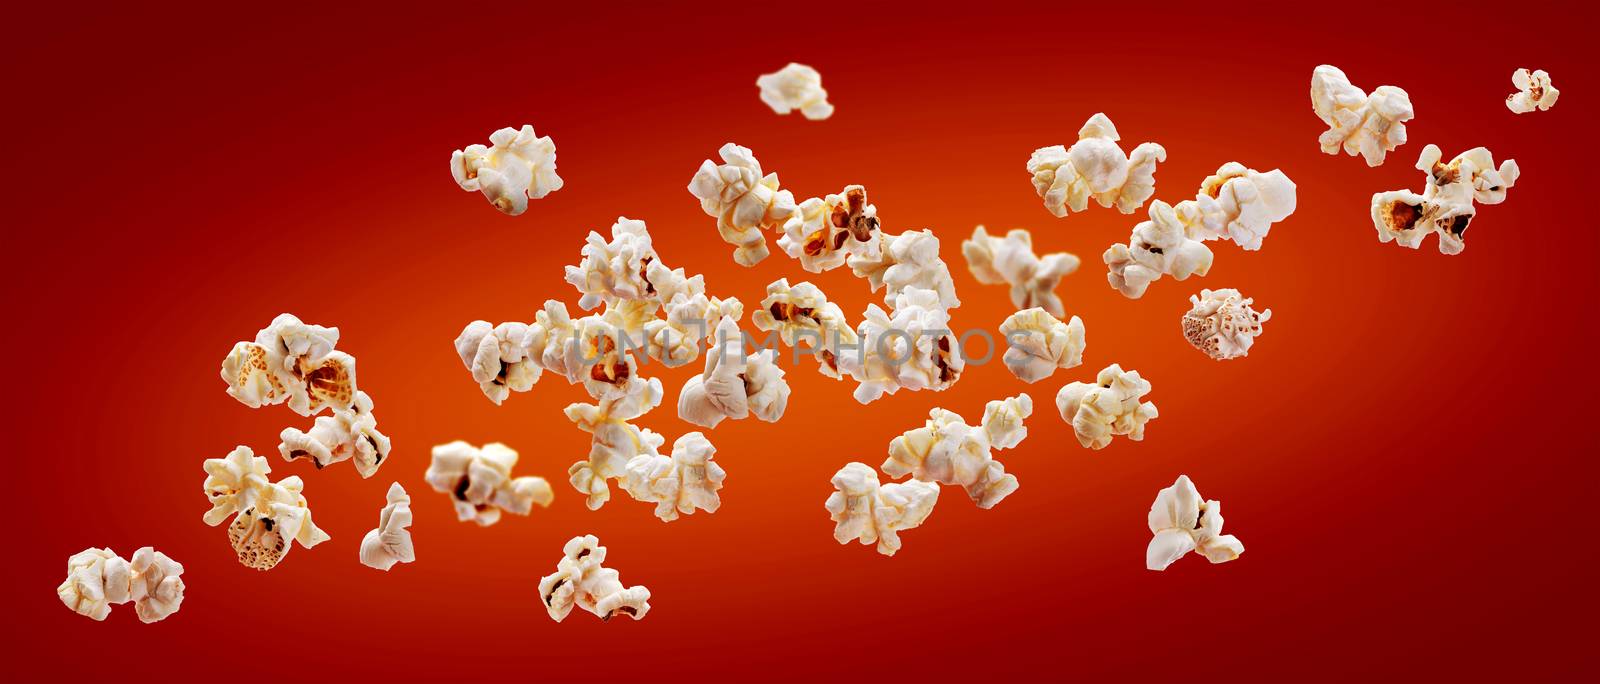 Popcorn isolated on red background. Falling or flying popcorn with copy space. Close-up